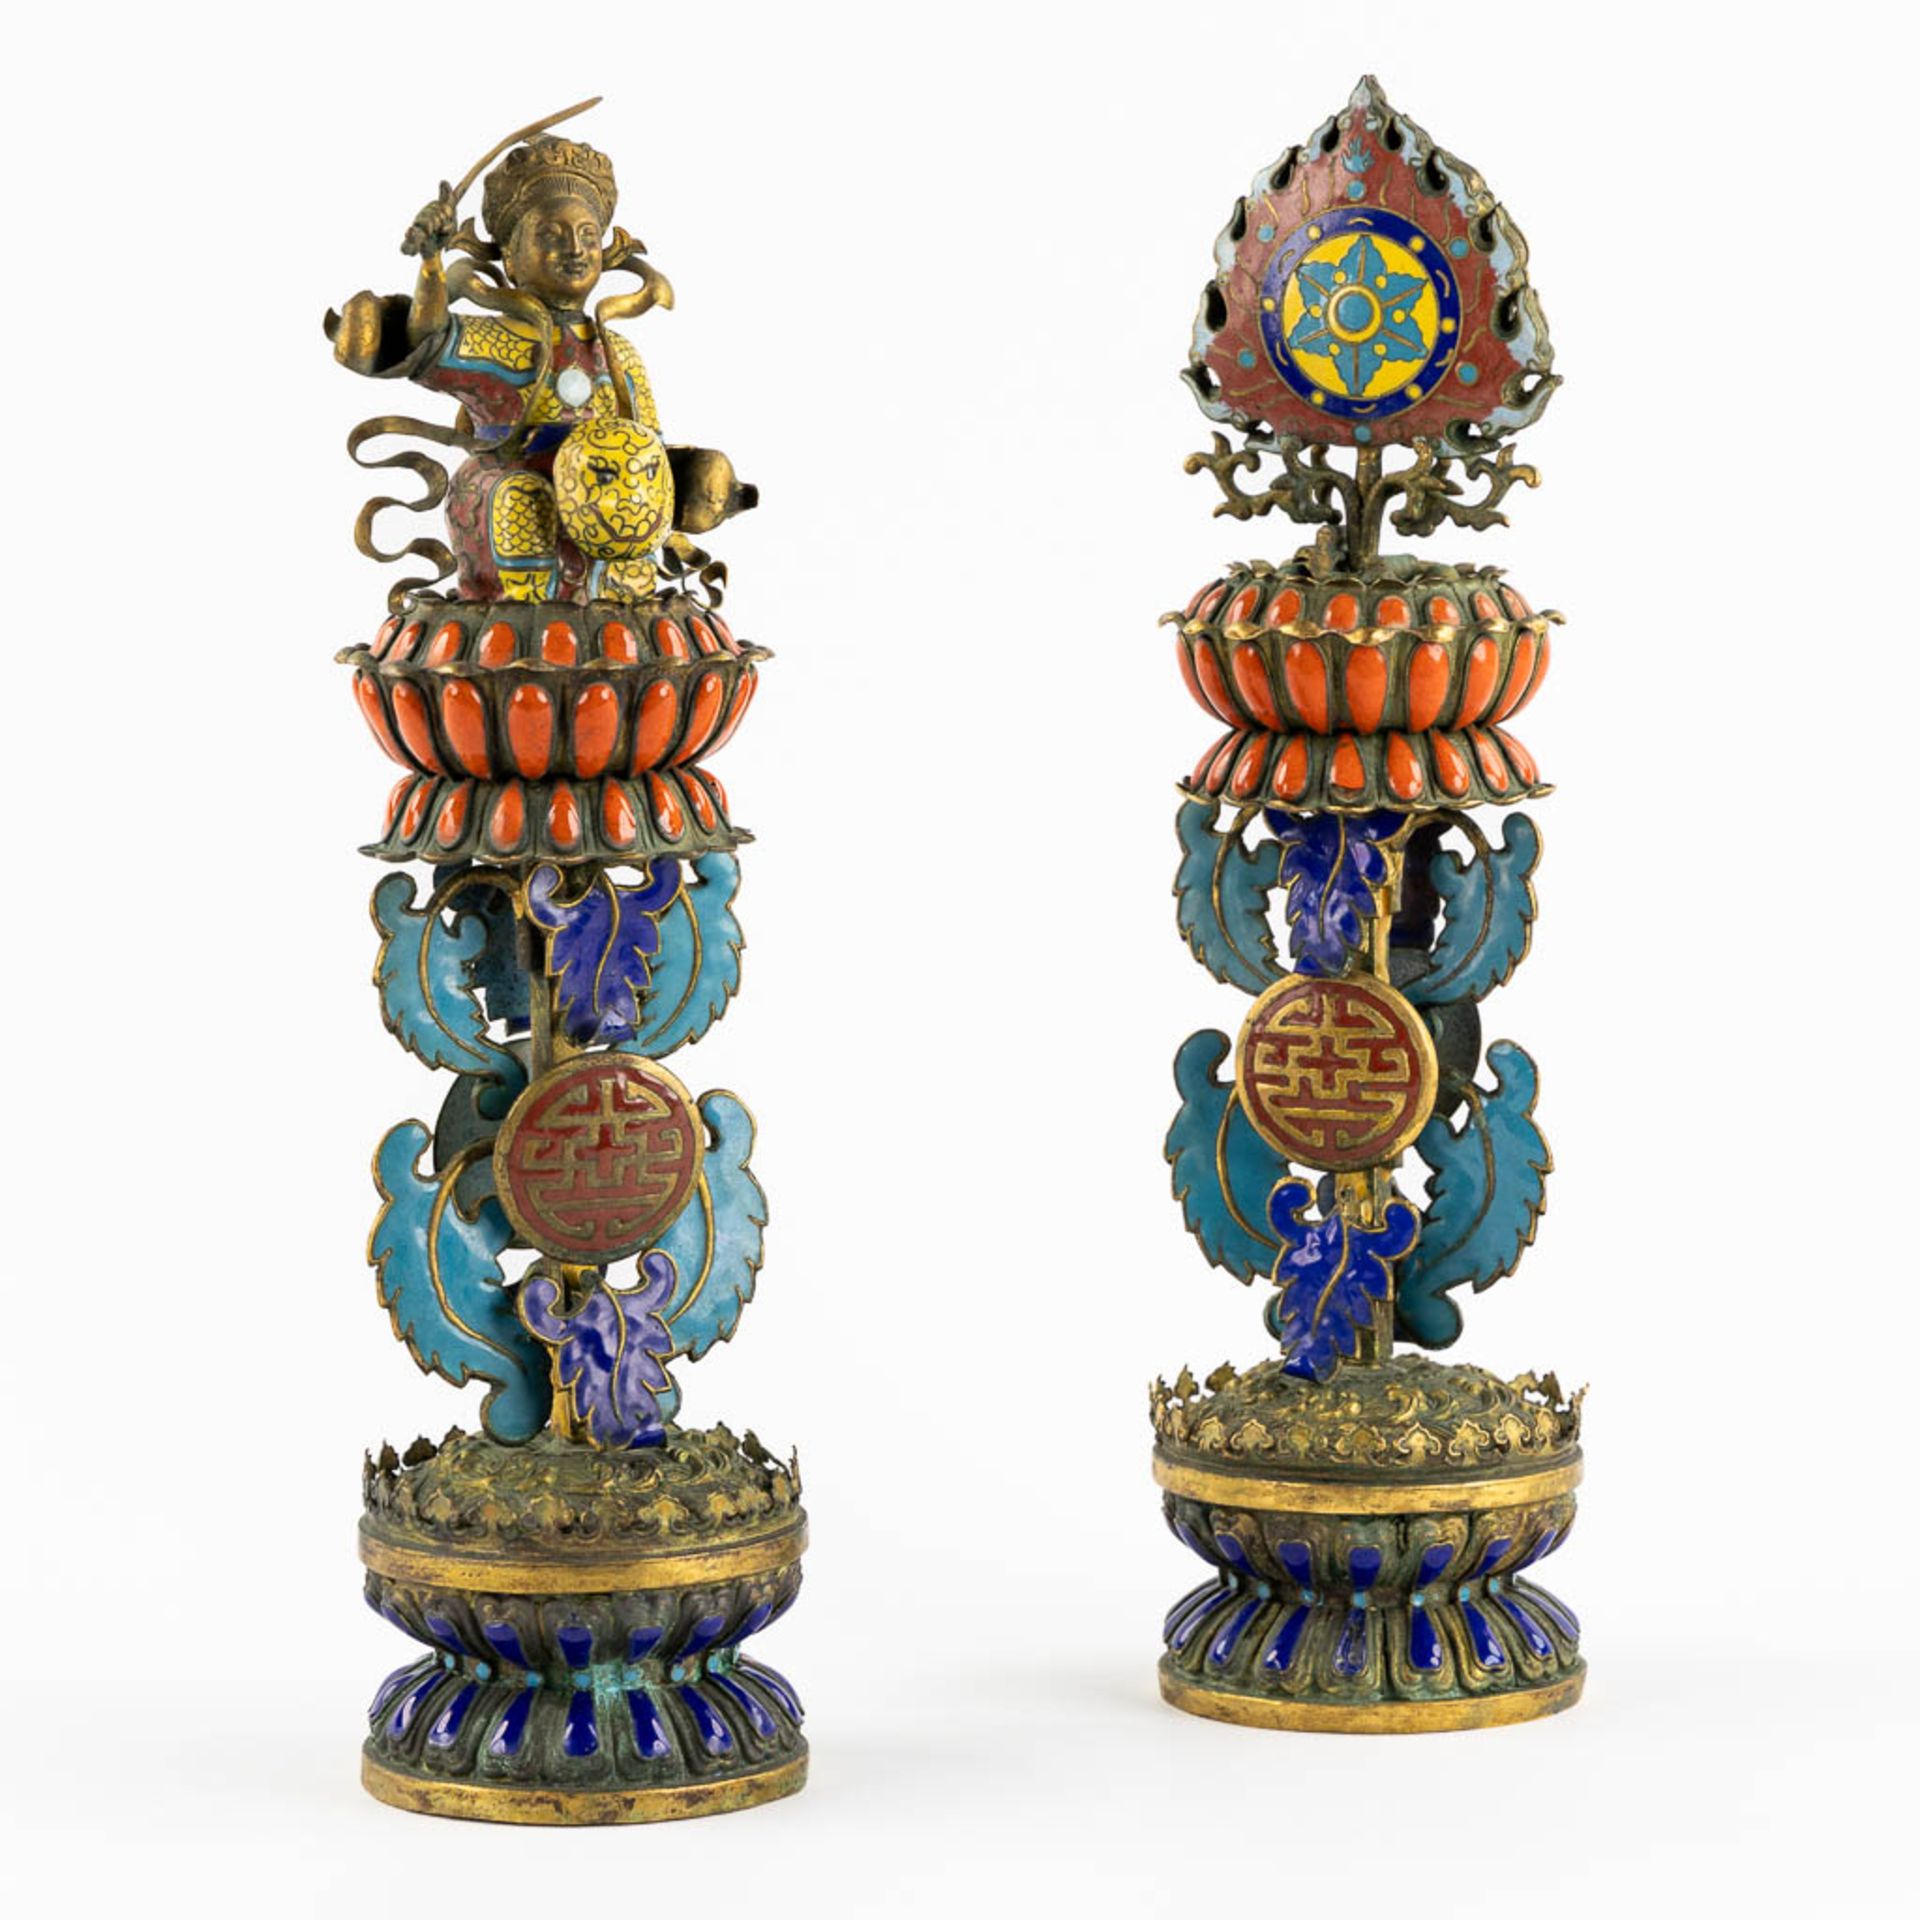 Two Chinese enamel inlaid and gilt metal Buddhist altar ornaments. 19th C. (H:32 x D:9 cm)